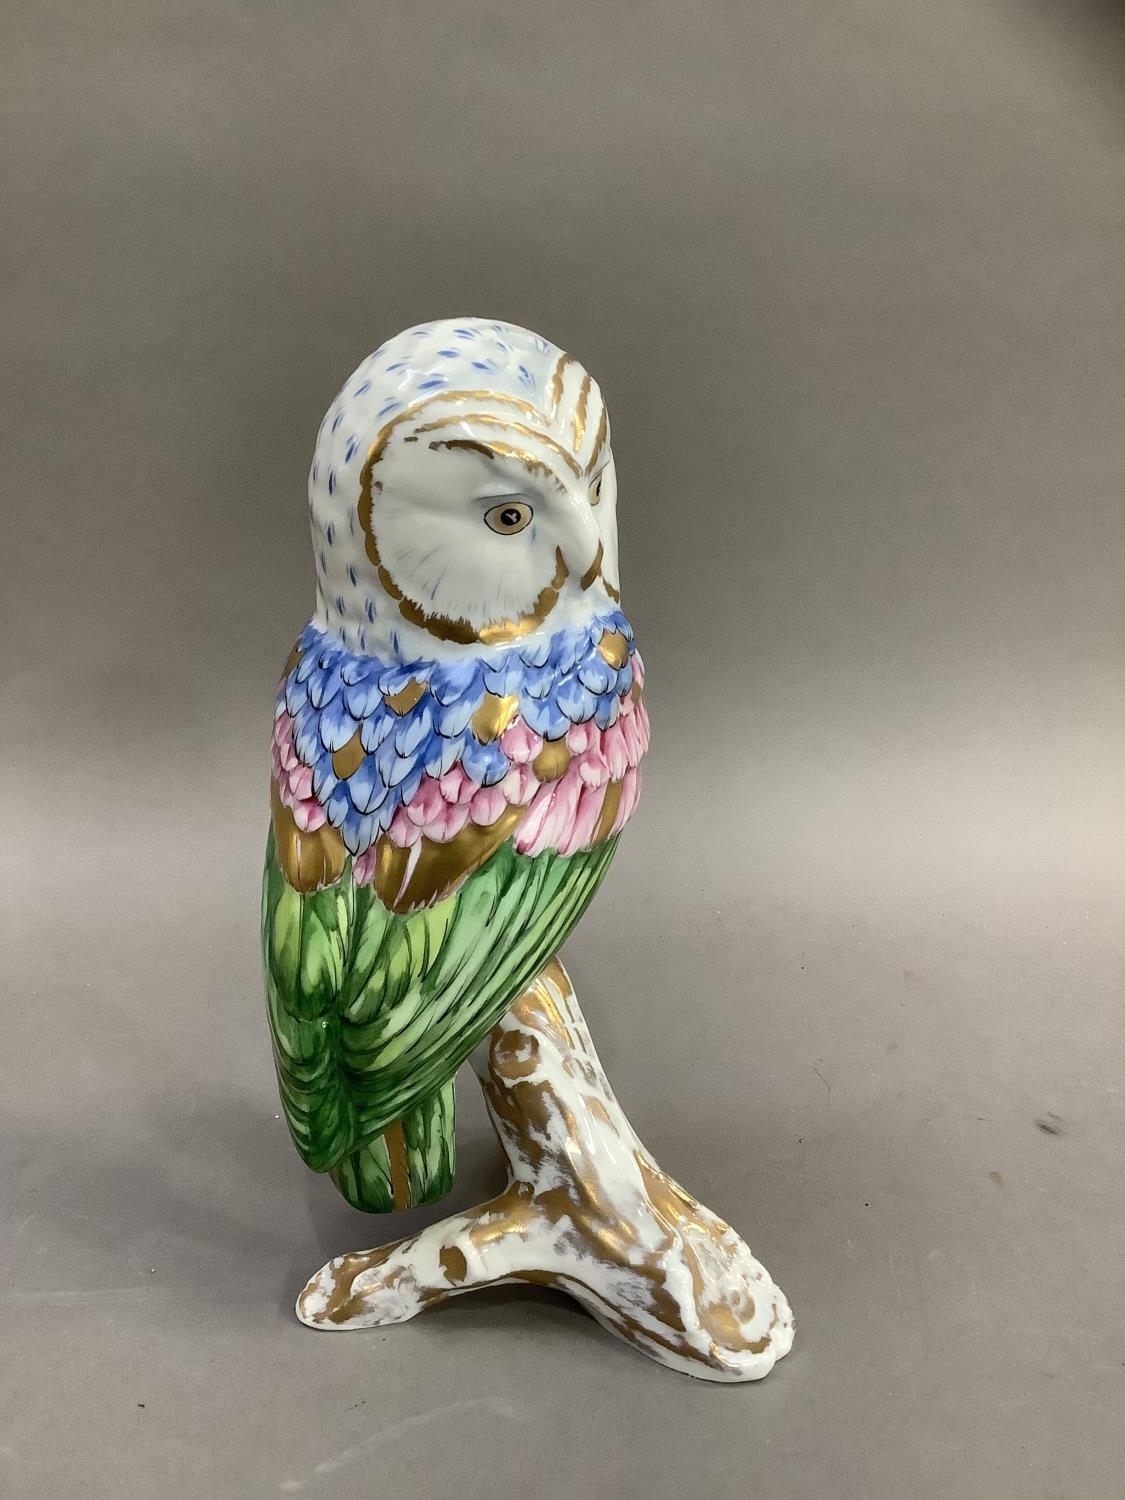 A Herend style china figure of an owl perched on a branch by Vista Alegre, Portugal, painted by hand - Image 2 of 6